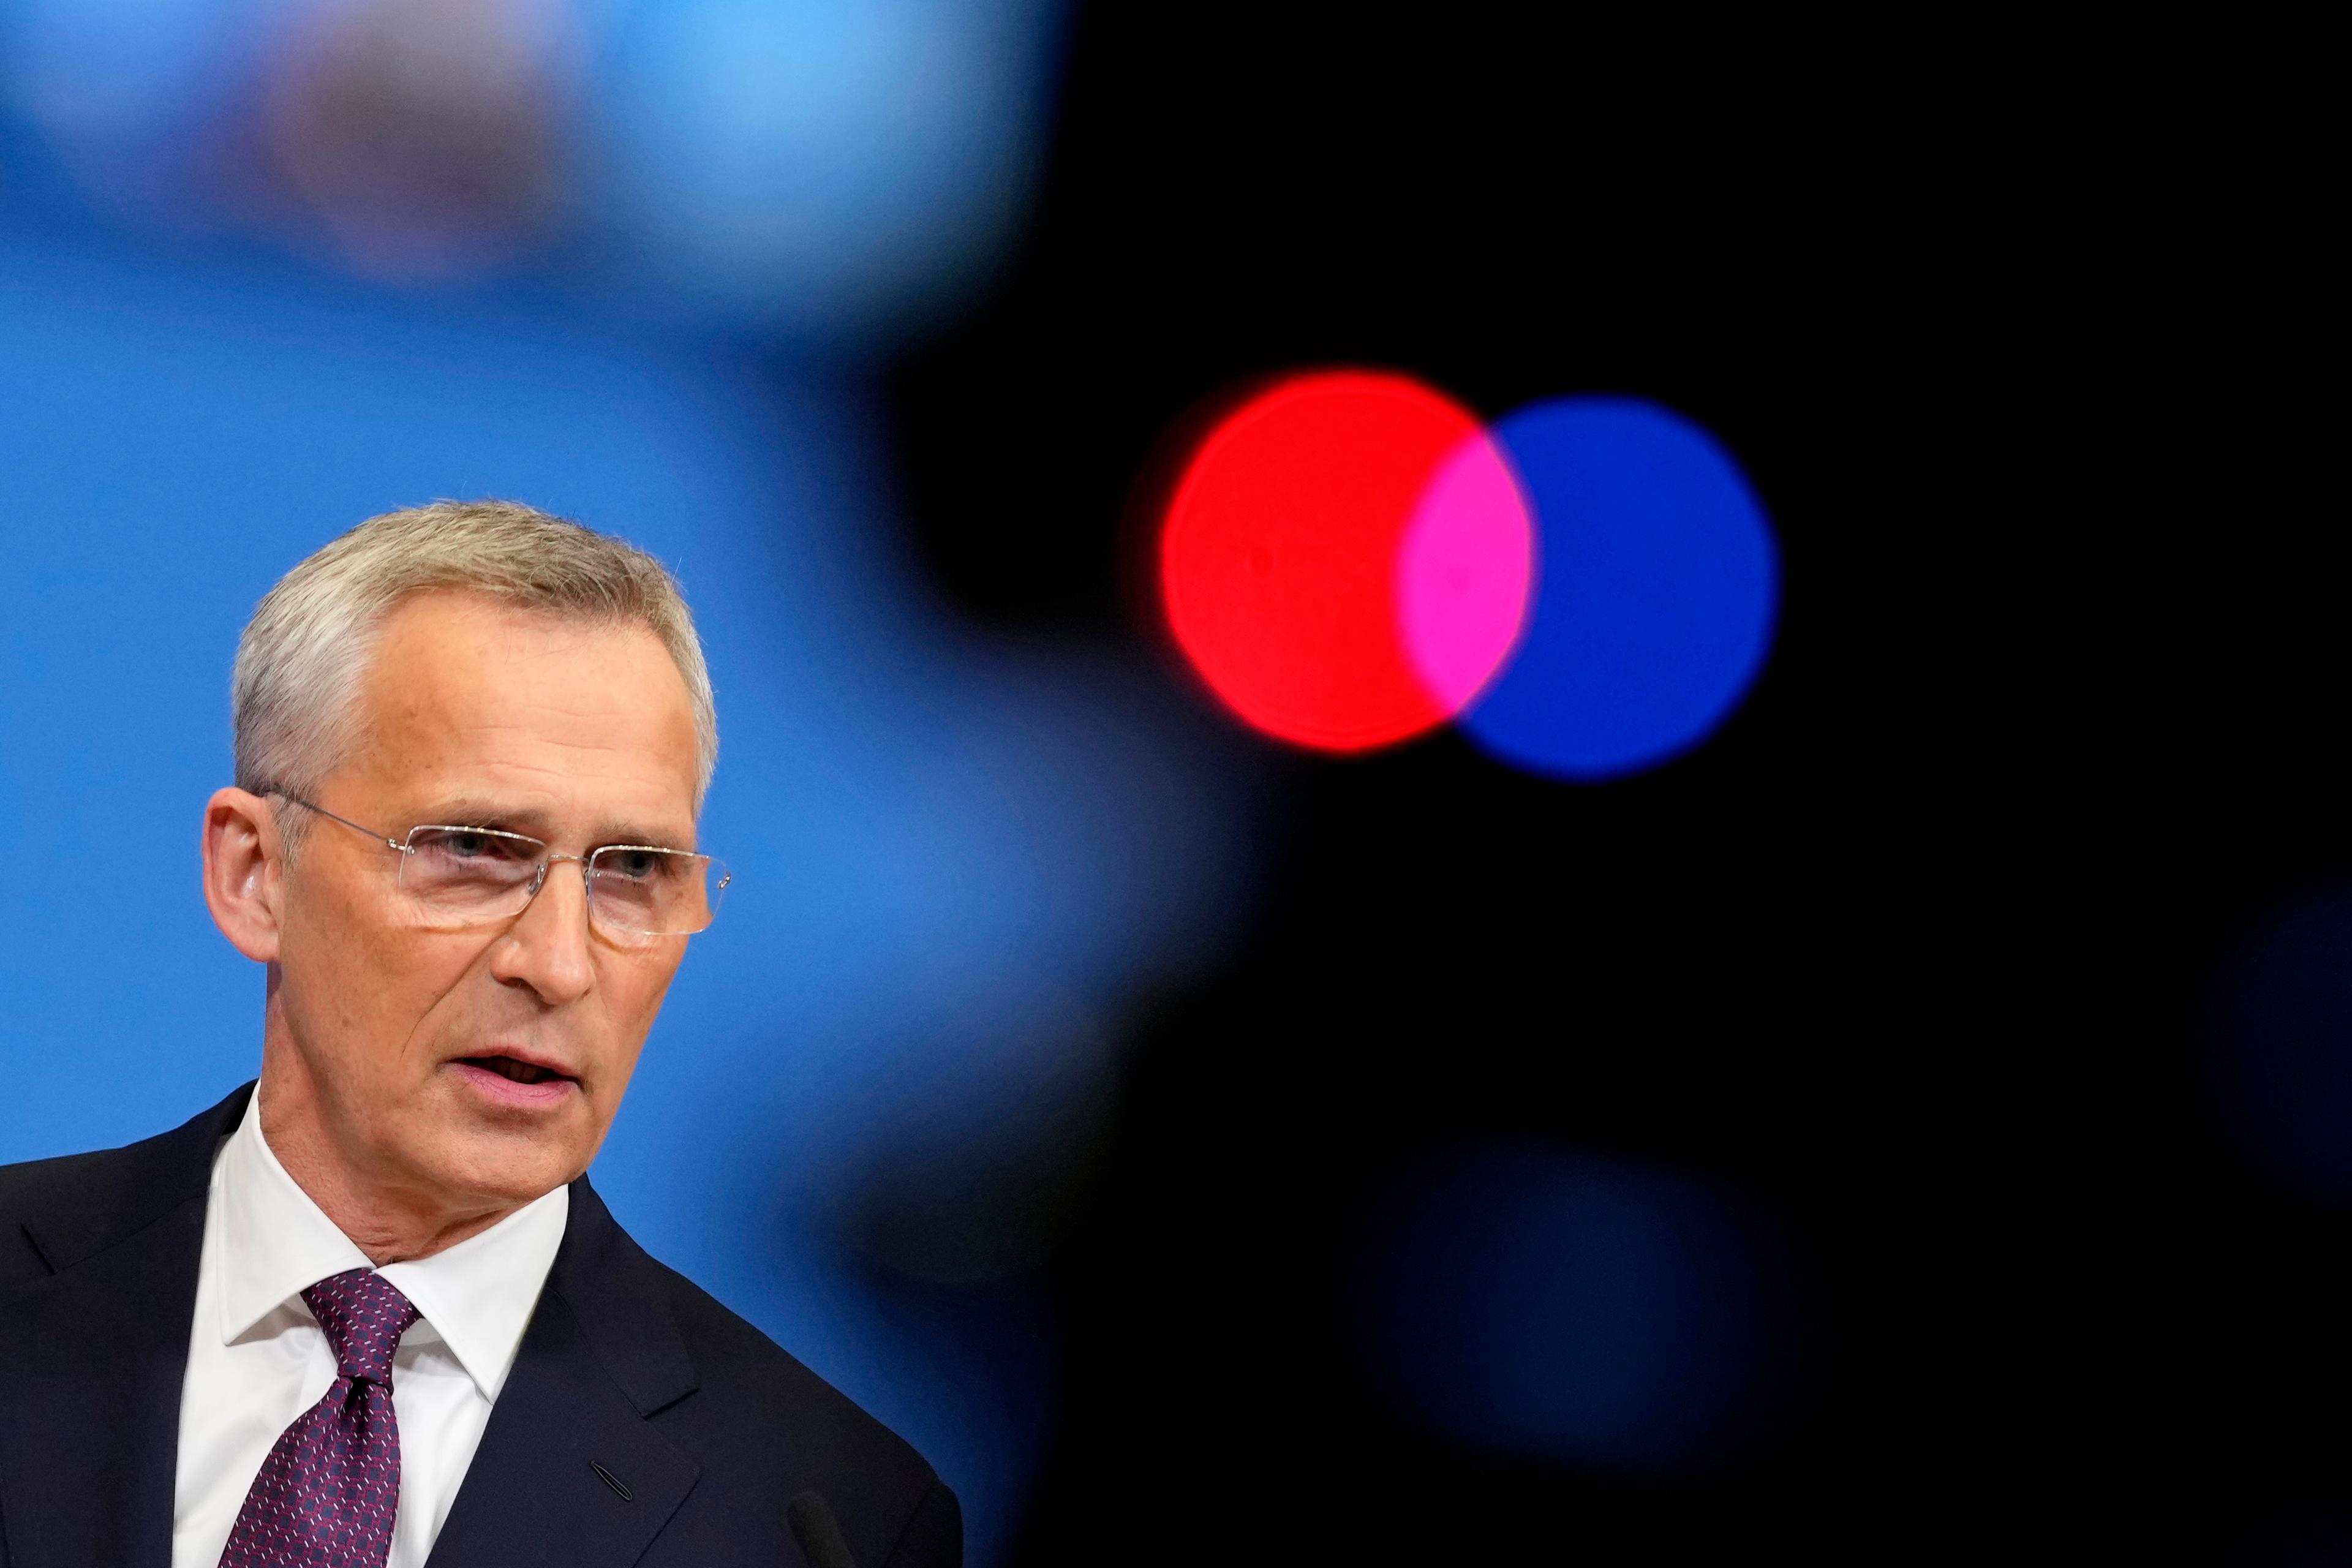 ‘Done deal’: Stoltenberg to remain NATO chief